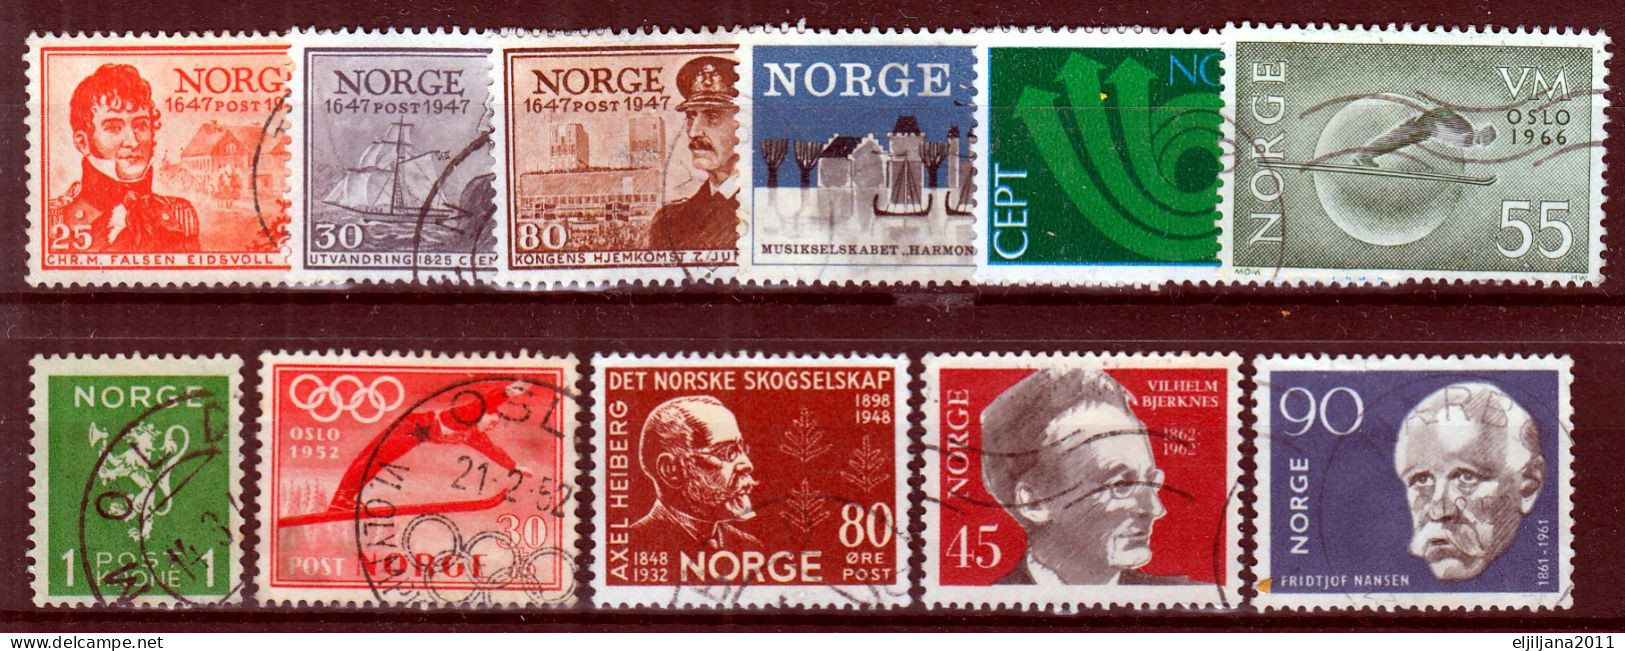 Action !! SALE !! 50 % OFF !! ⁕ Norway / NORGE 1938 - 1966 ⁕ Nice Collection / Lot ⁕ 32v Used - See Scan - Sammlungen